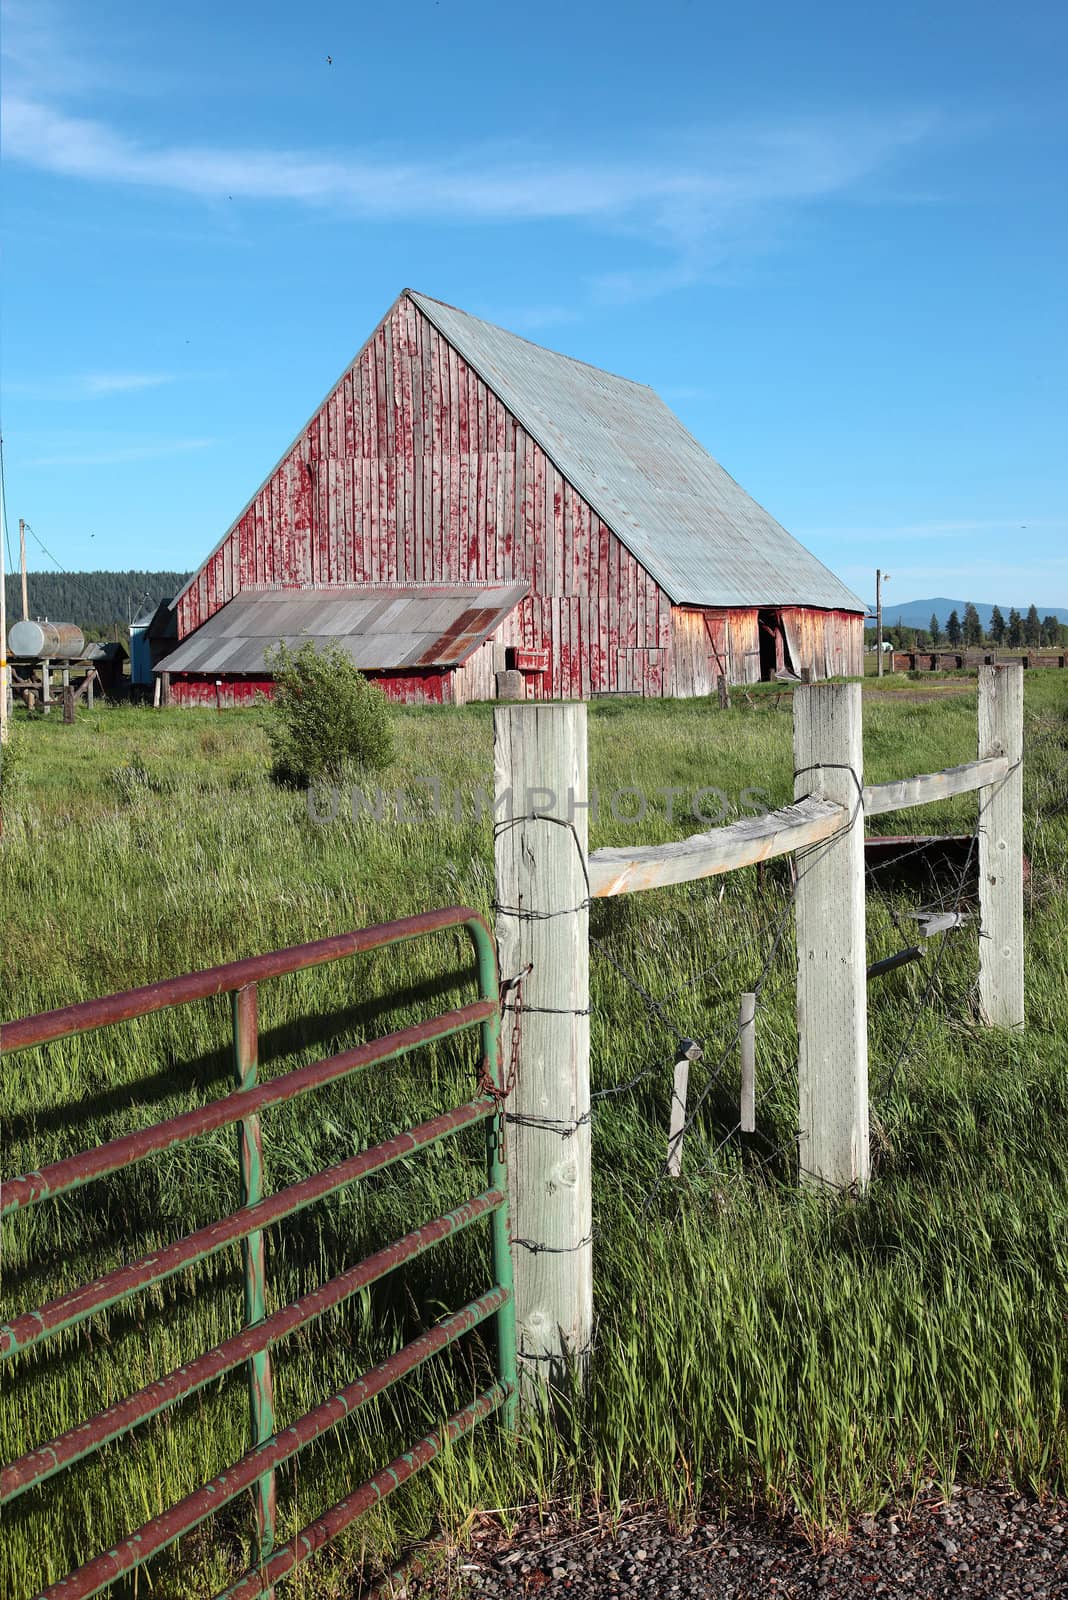 Old barn and fence, Oregon. by Rigucci